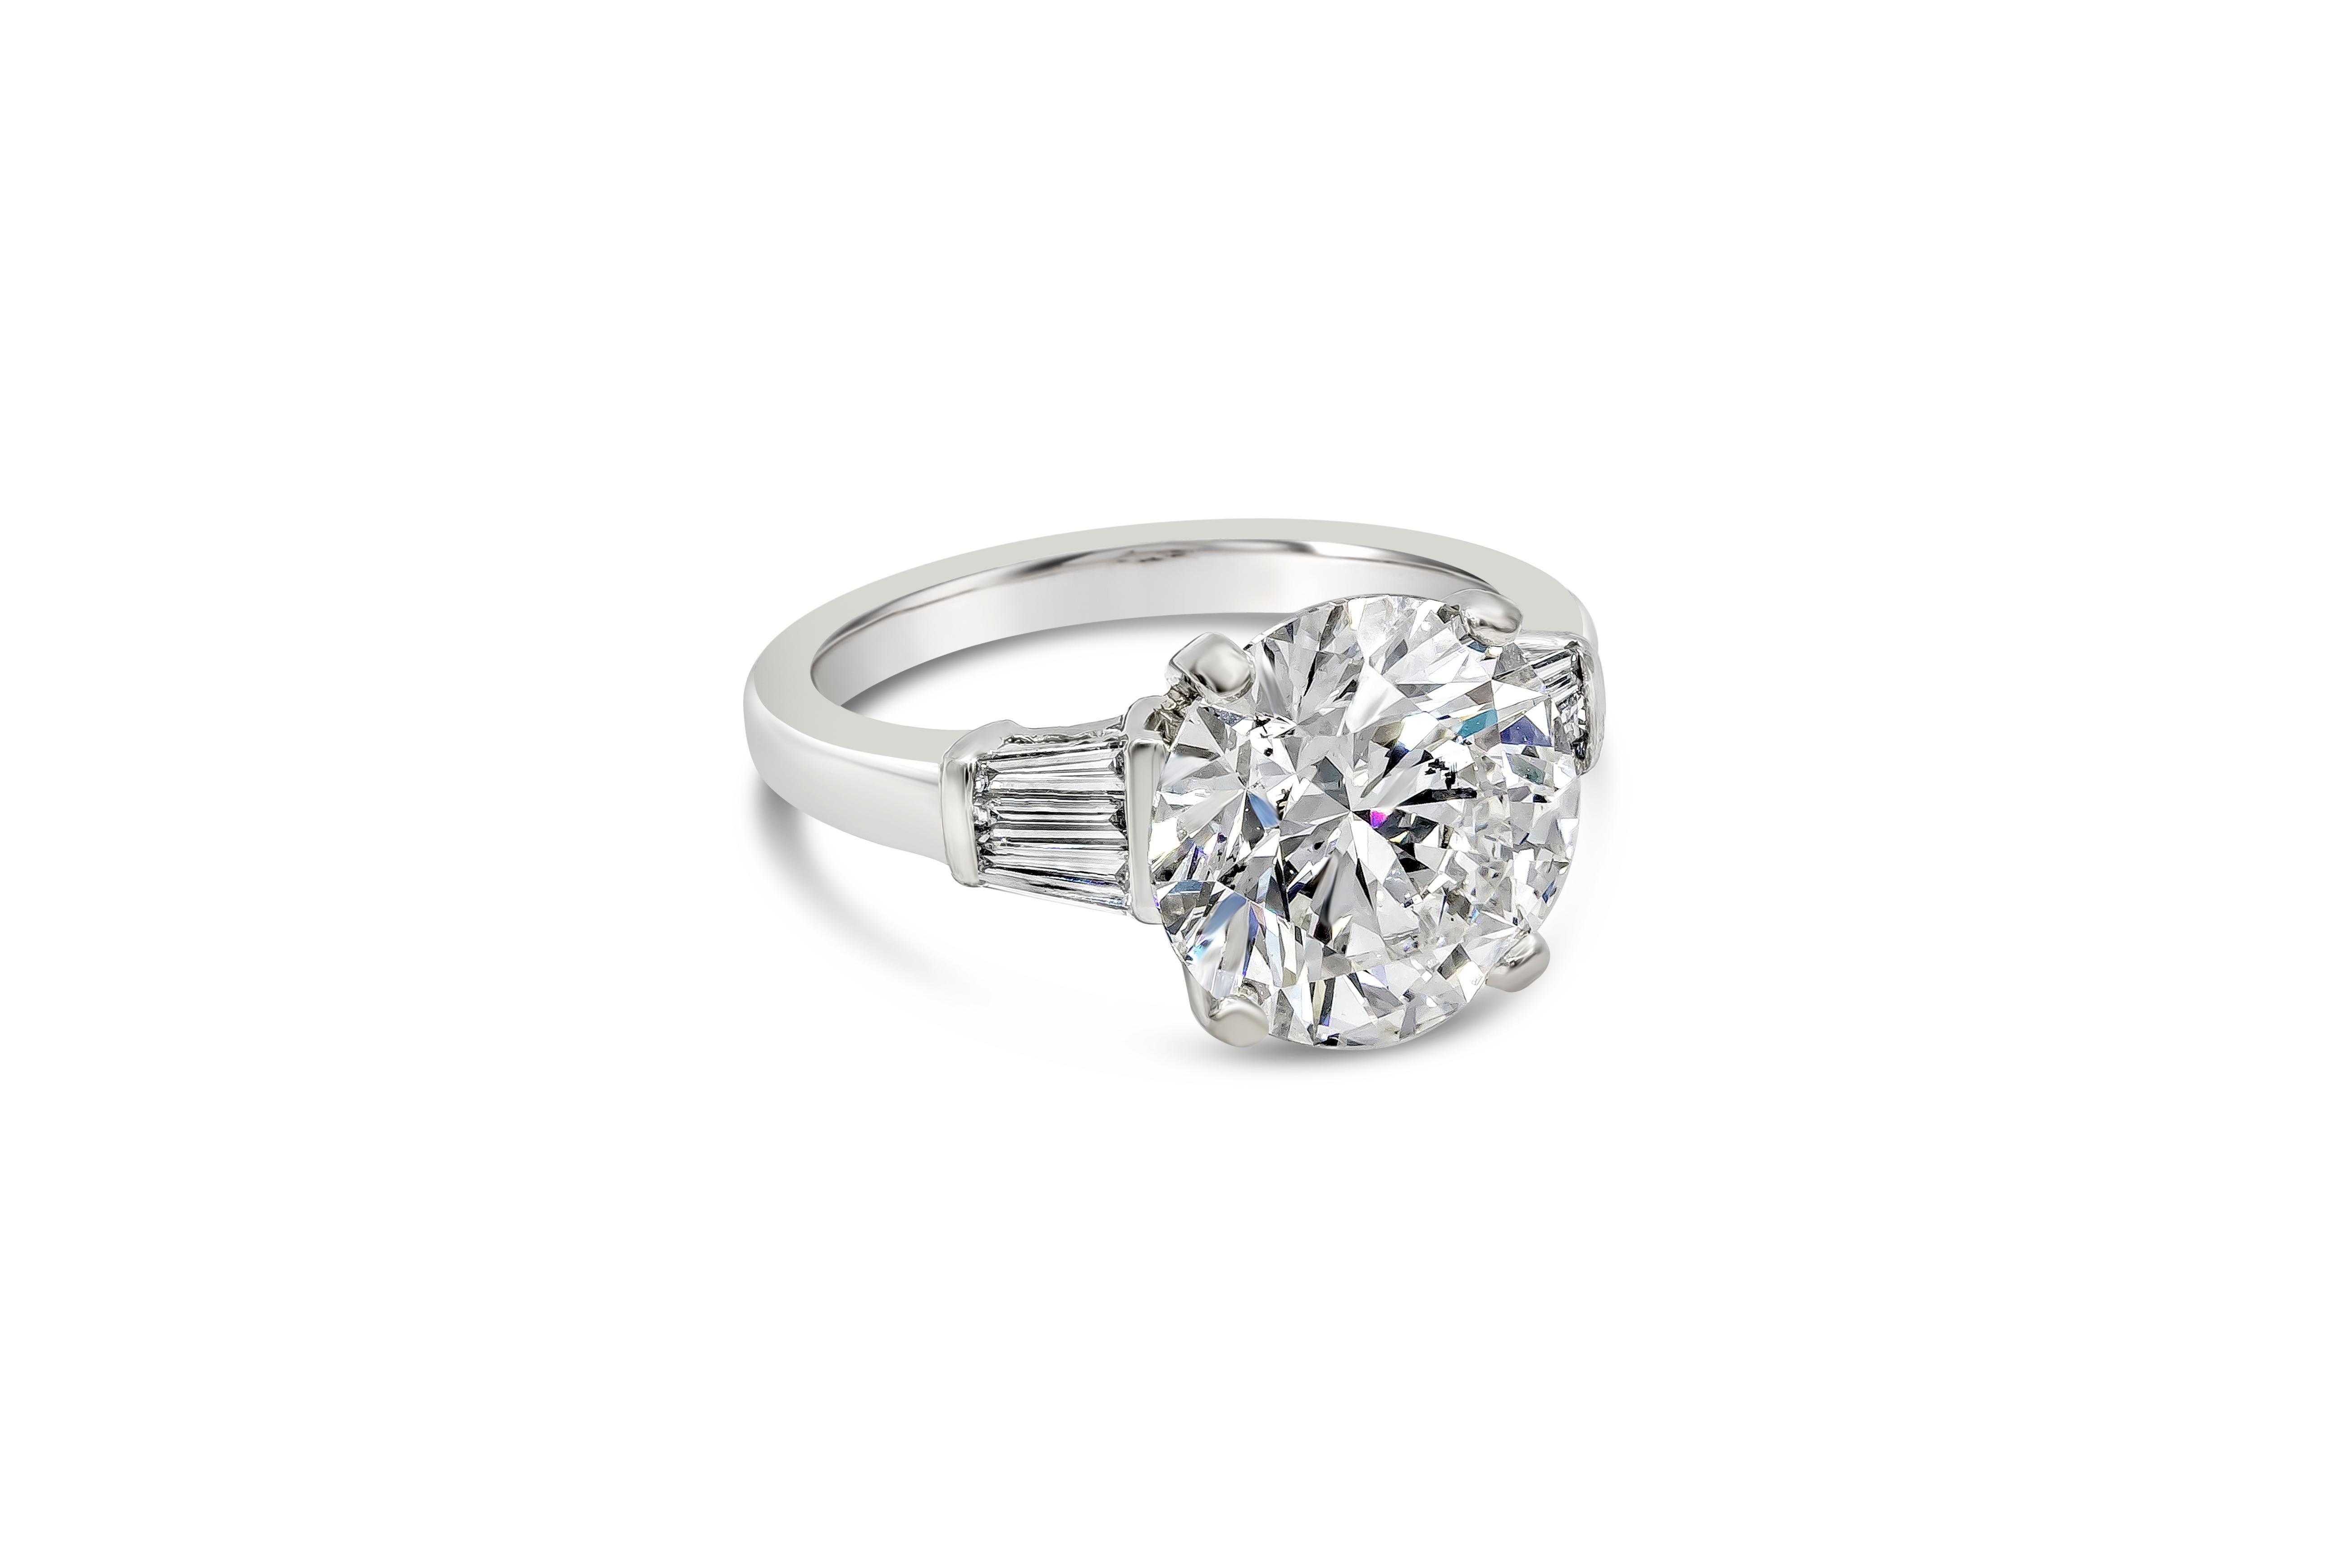 A classic and unique engagement ring style showcasing 5.02 carat brilliant round diamond certified by GIA as G color, SI2 in clarity. Accenting by weighing 0.37 carat total three tapered baguette diamonds on either side, to make it look like one